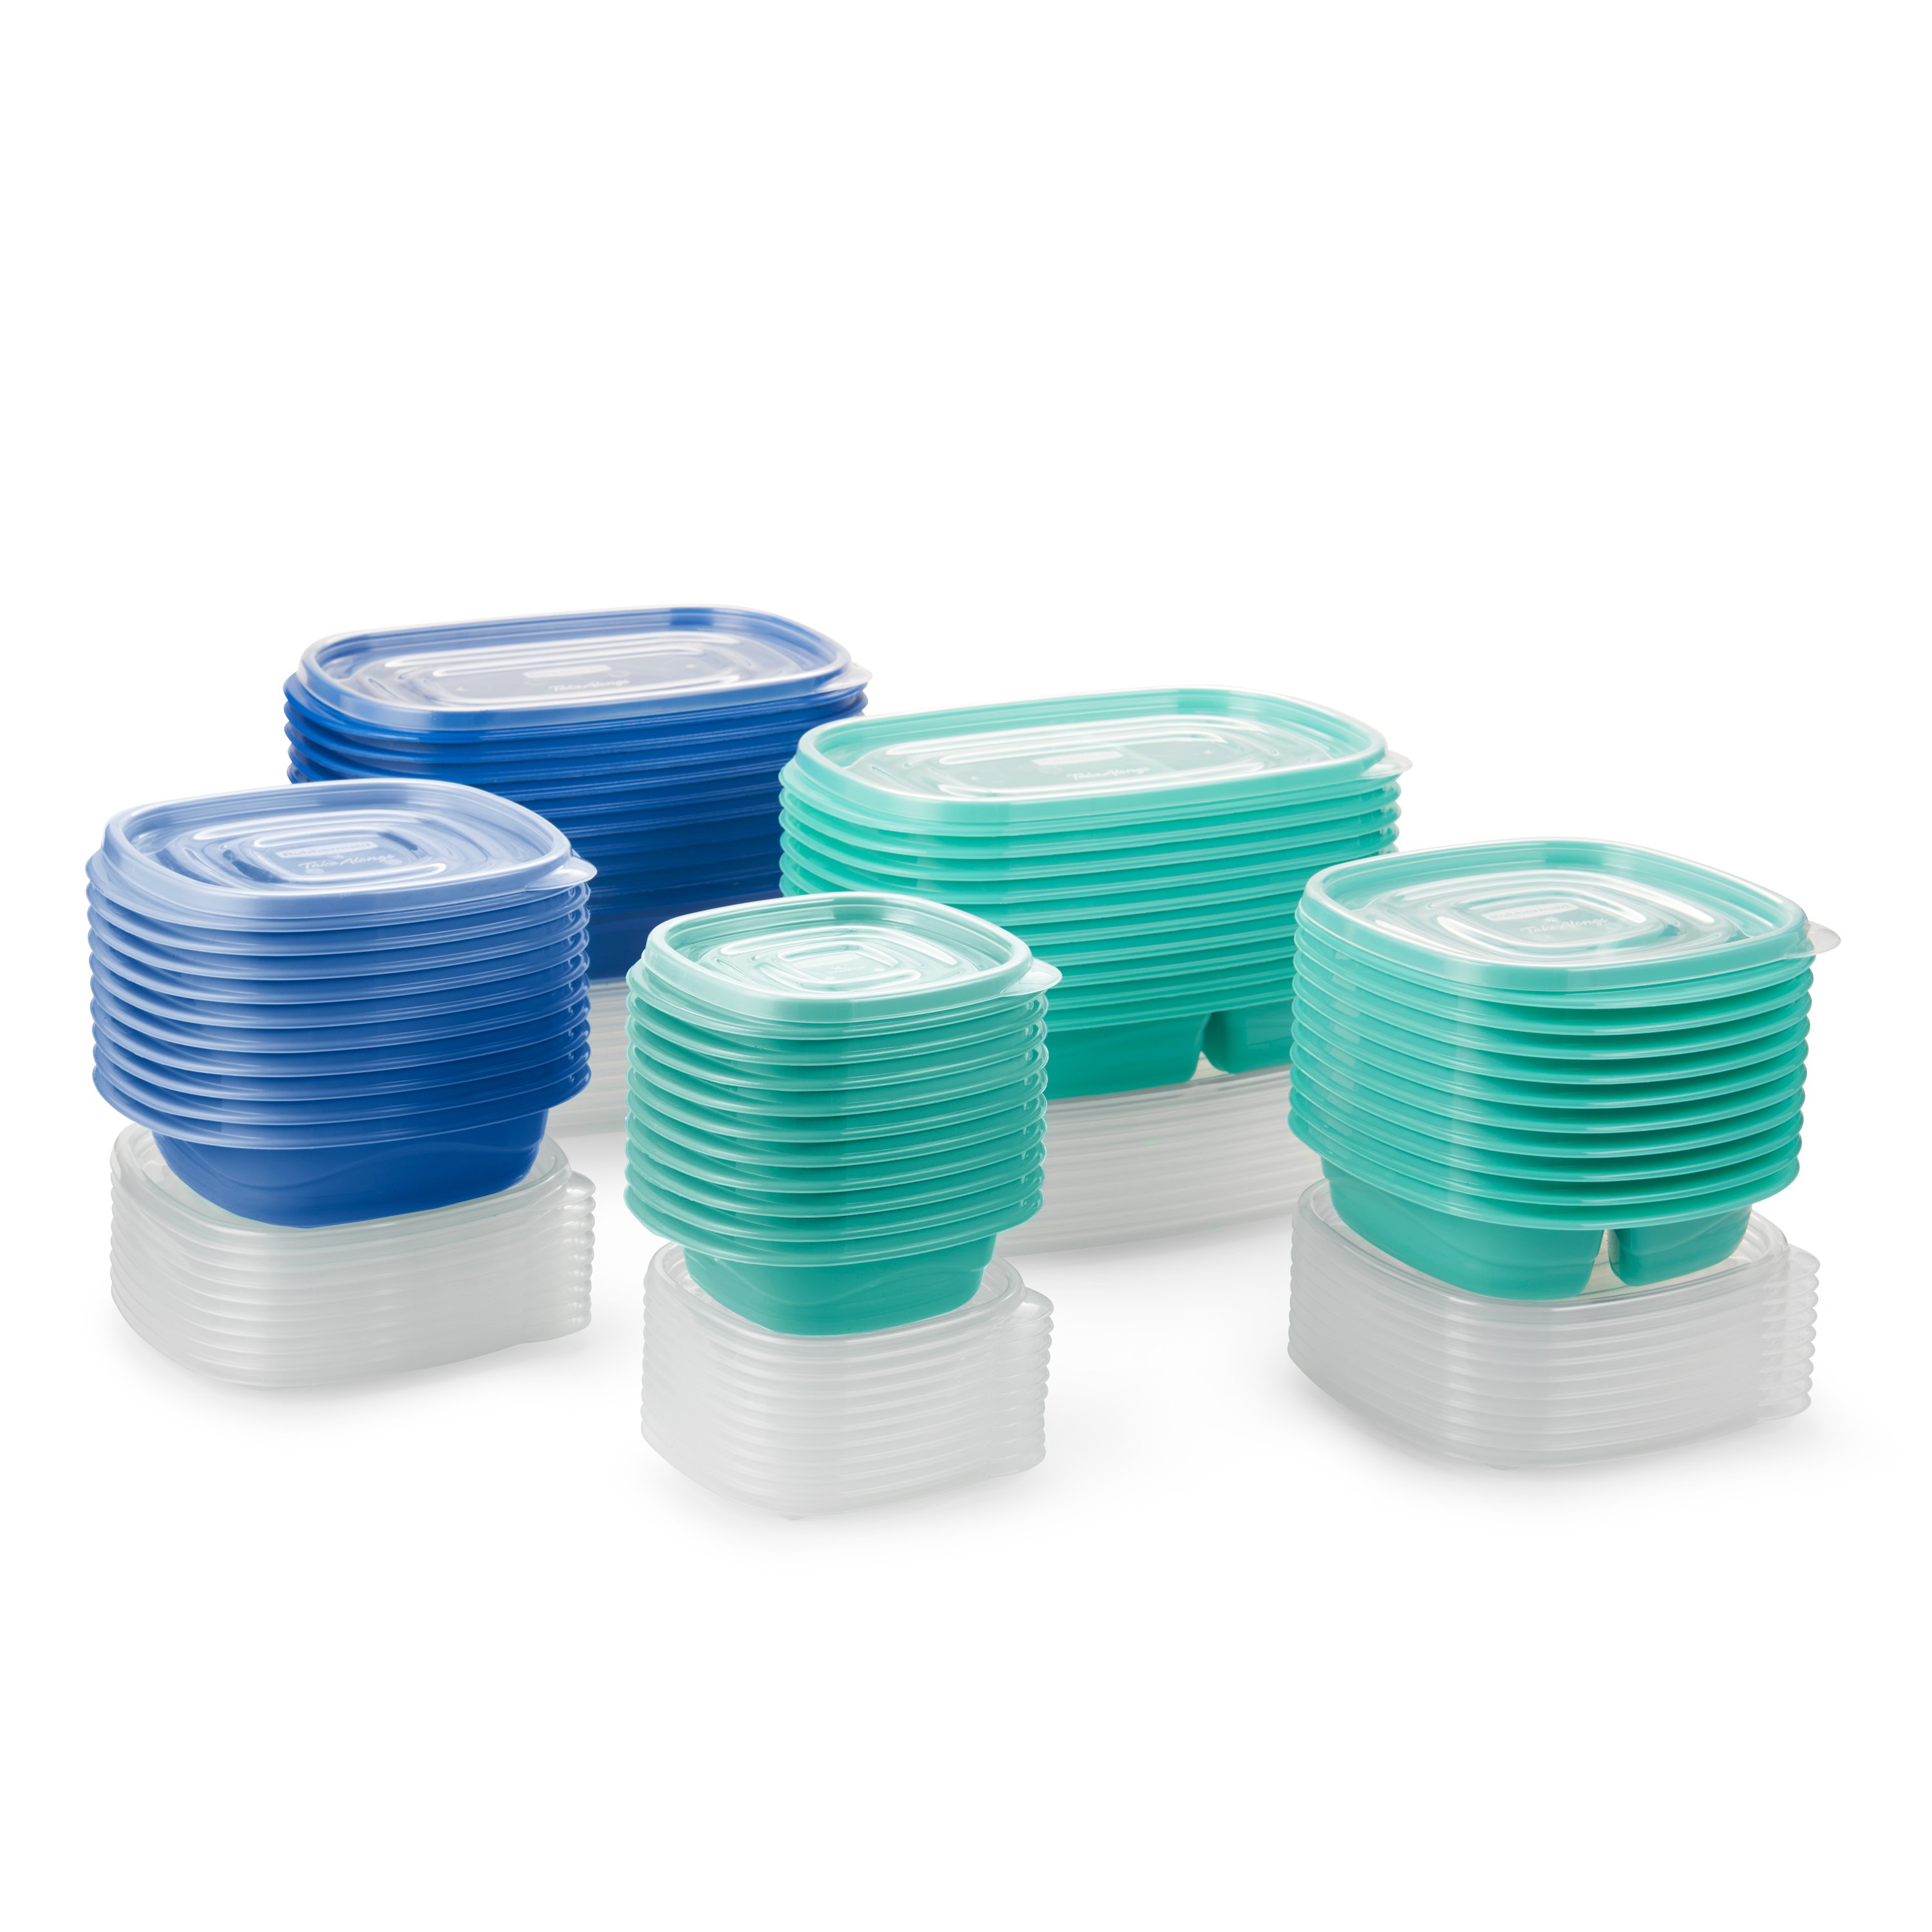 https://s7d9.scene7.com/is/image//NewellRubbermaid/SAP-rubbermaid-food-storage-tka-teal-blue-group-angle-cropped